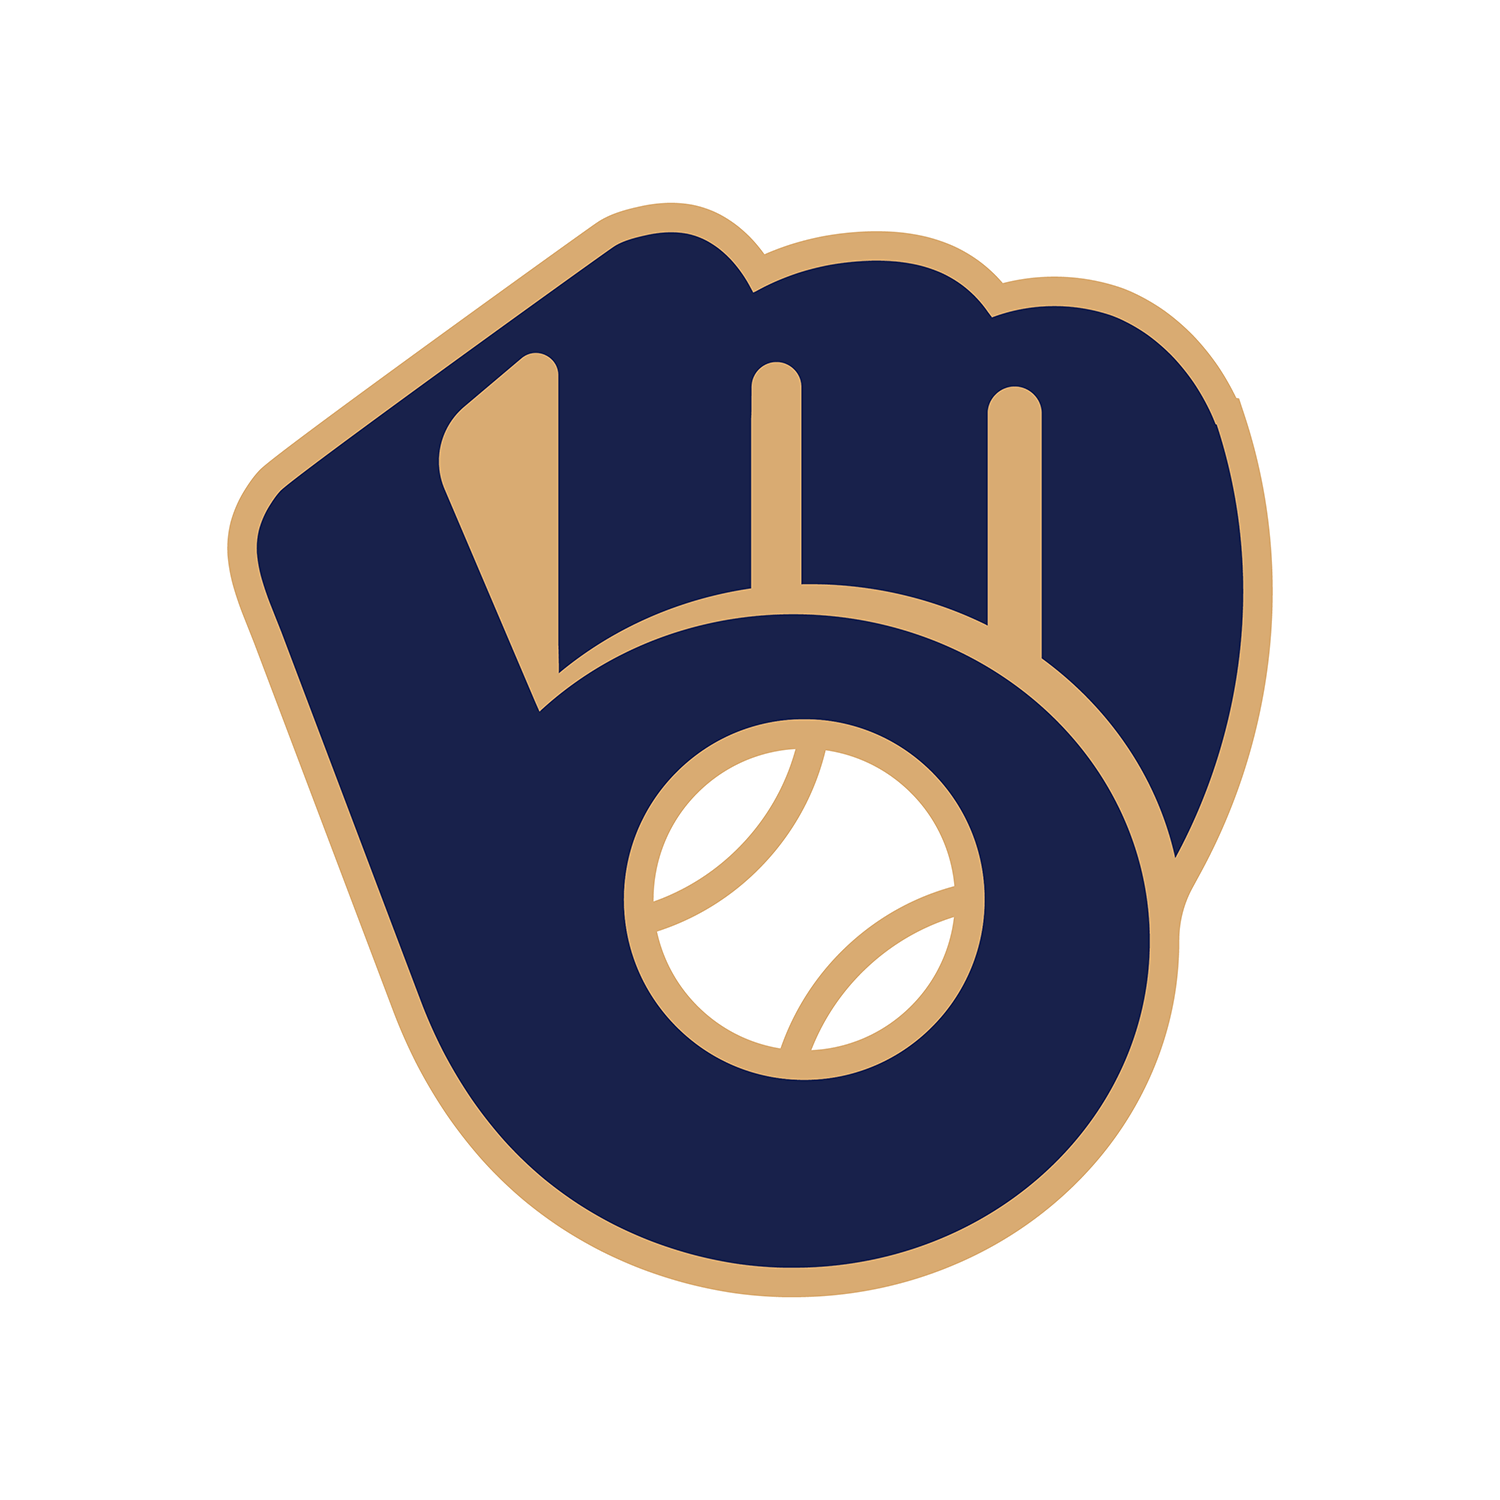 Old M Logo - How old were you when you realized the old Milwaukee Brewers logo ...